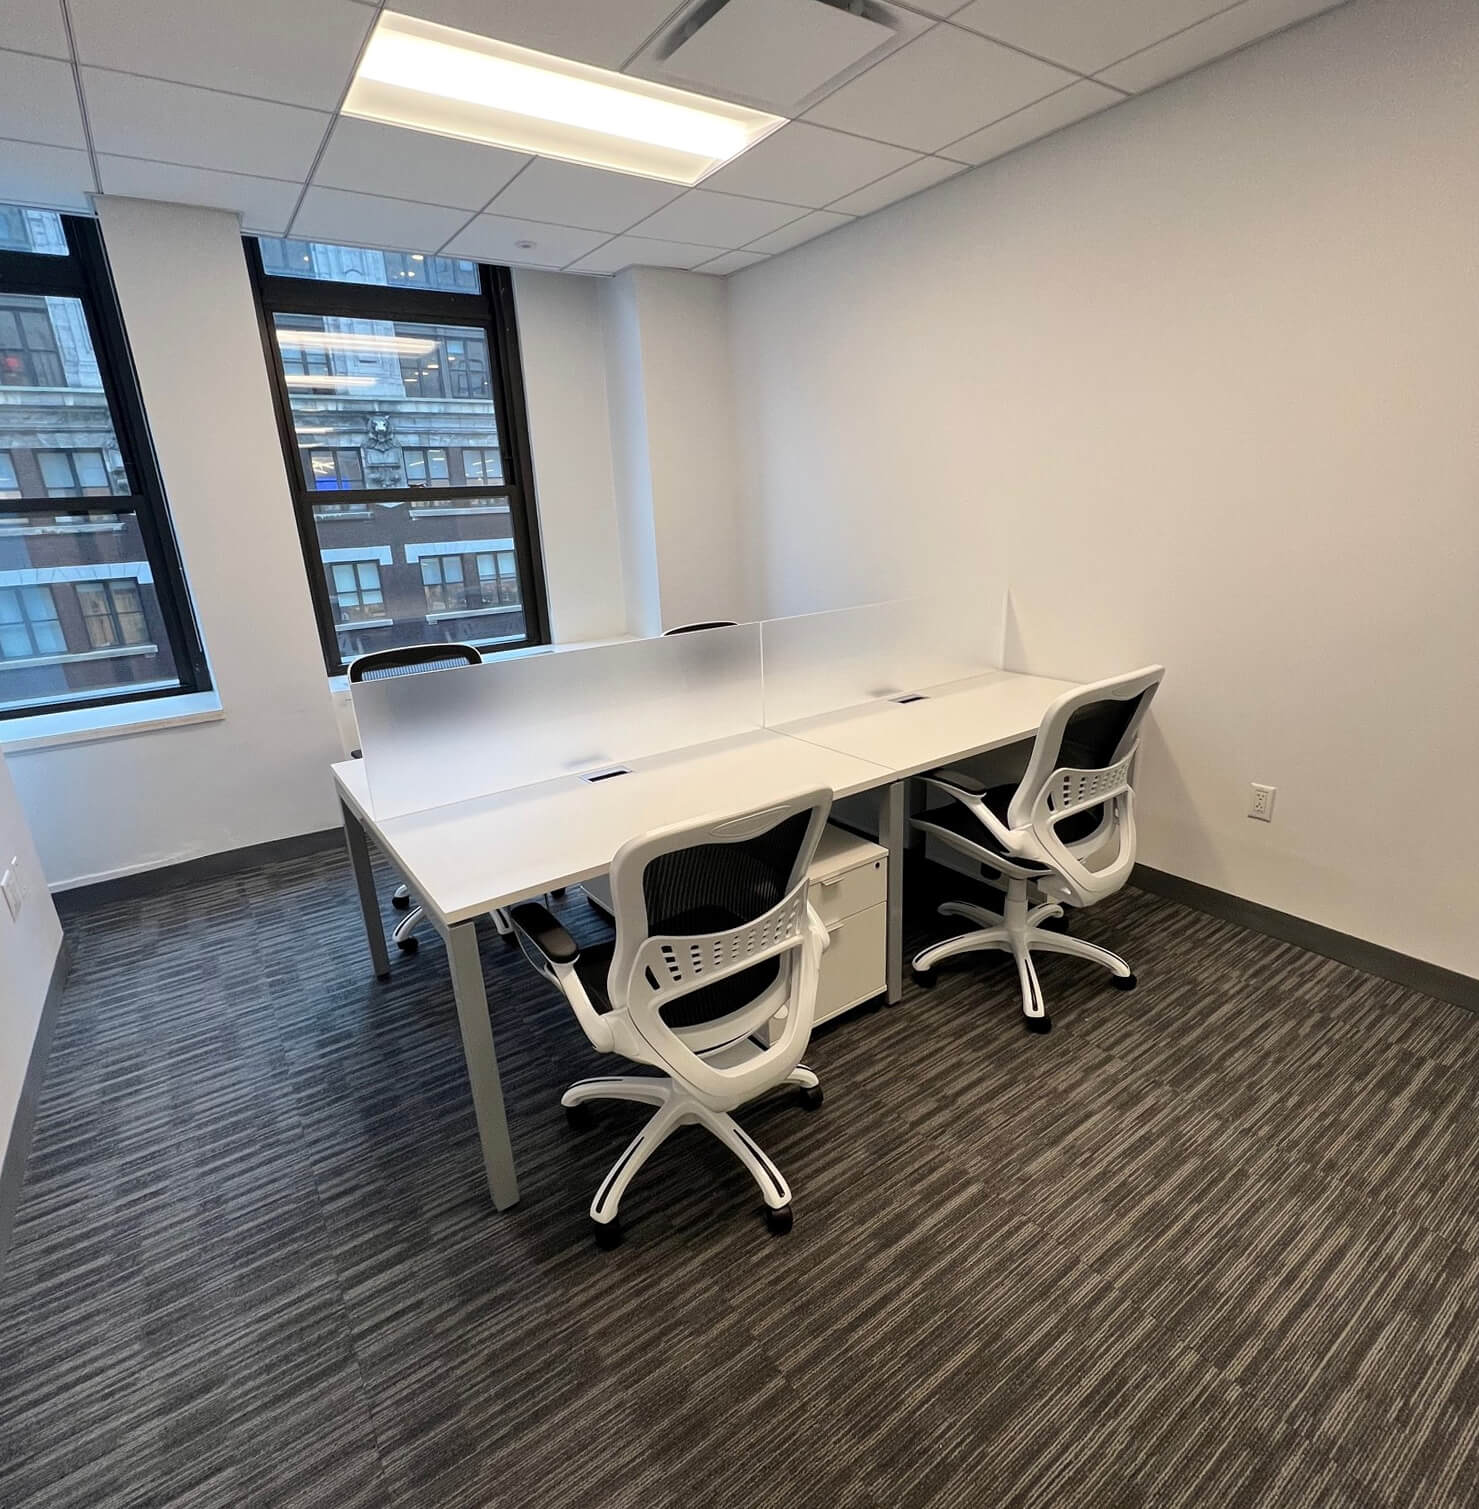 PTIOF, New Jersey’s top office furniture store, is determined to make refurnishing any corporate or home office easy and convenient.